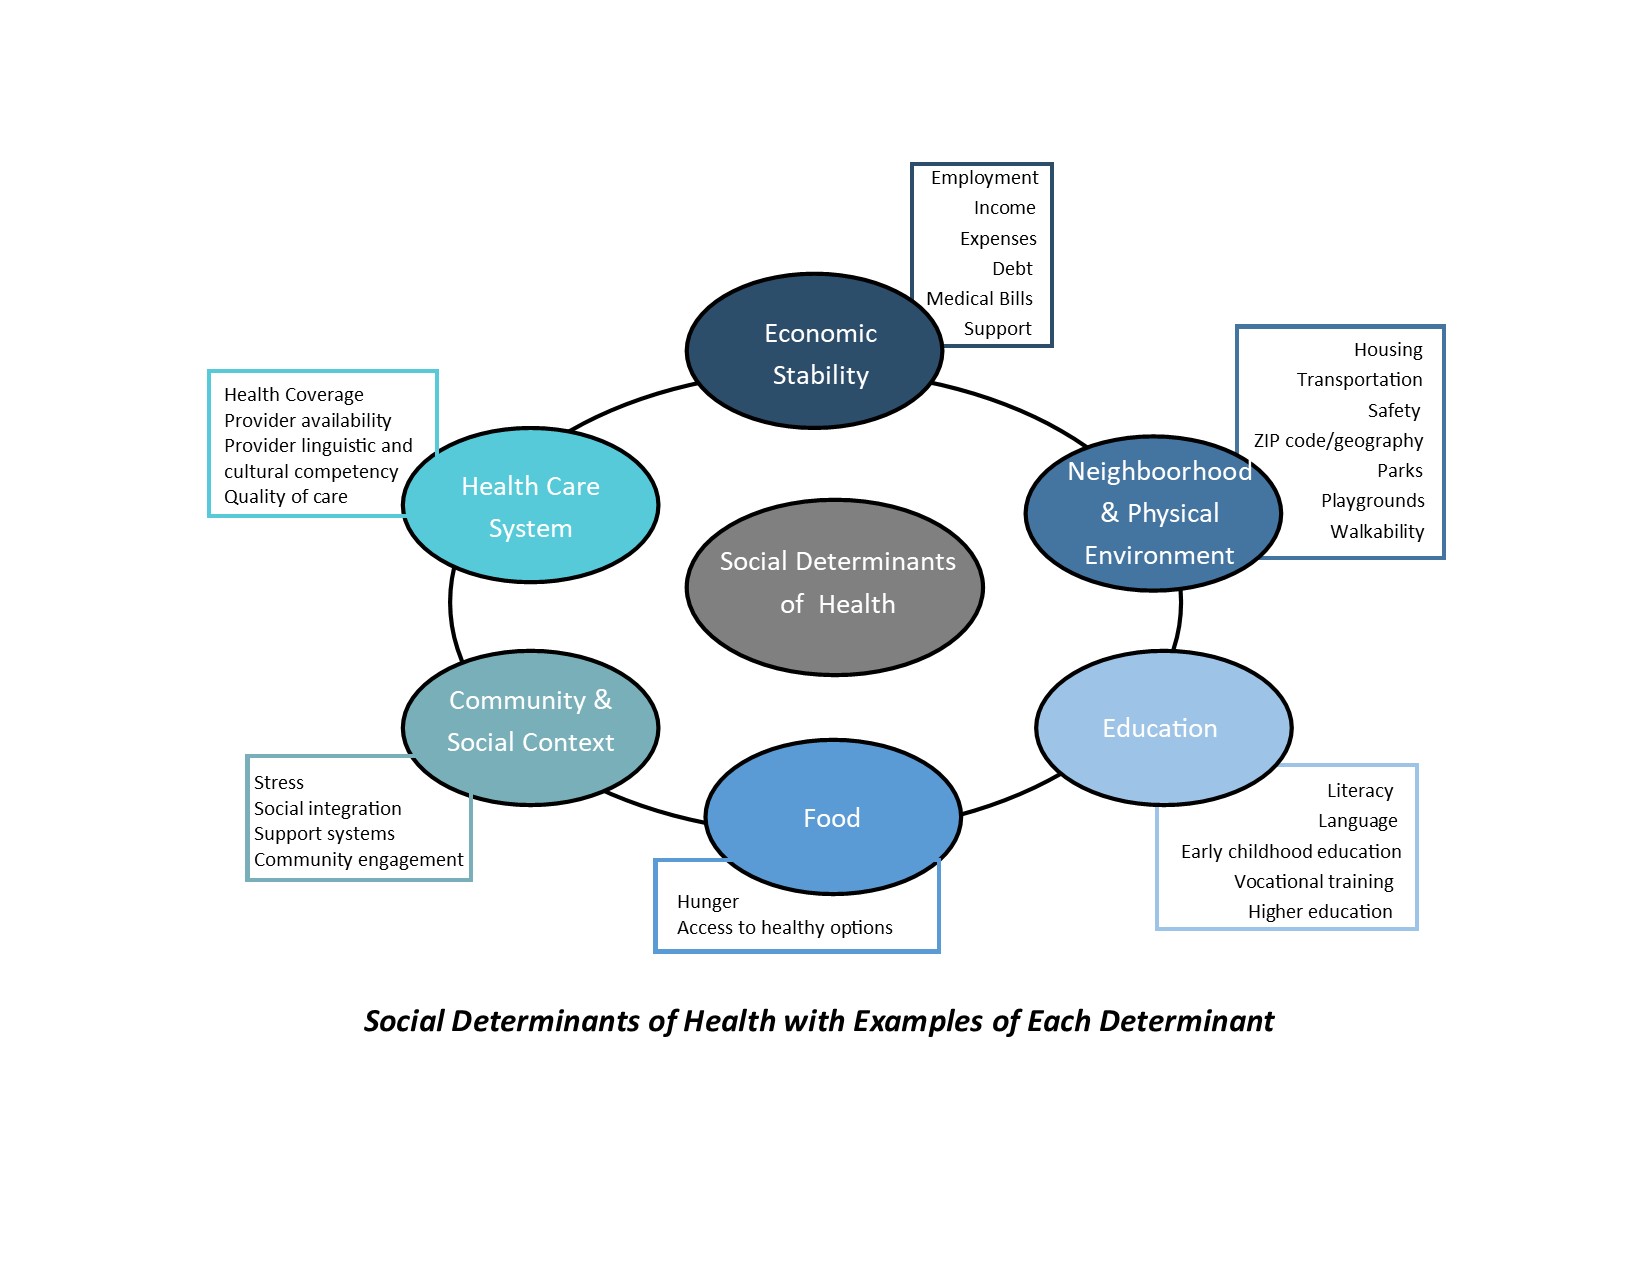 The SDoH and examples of each determinant